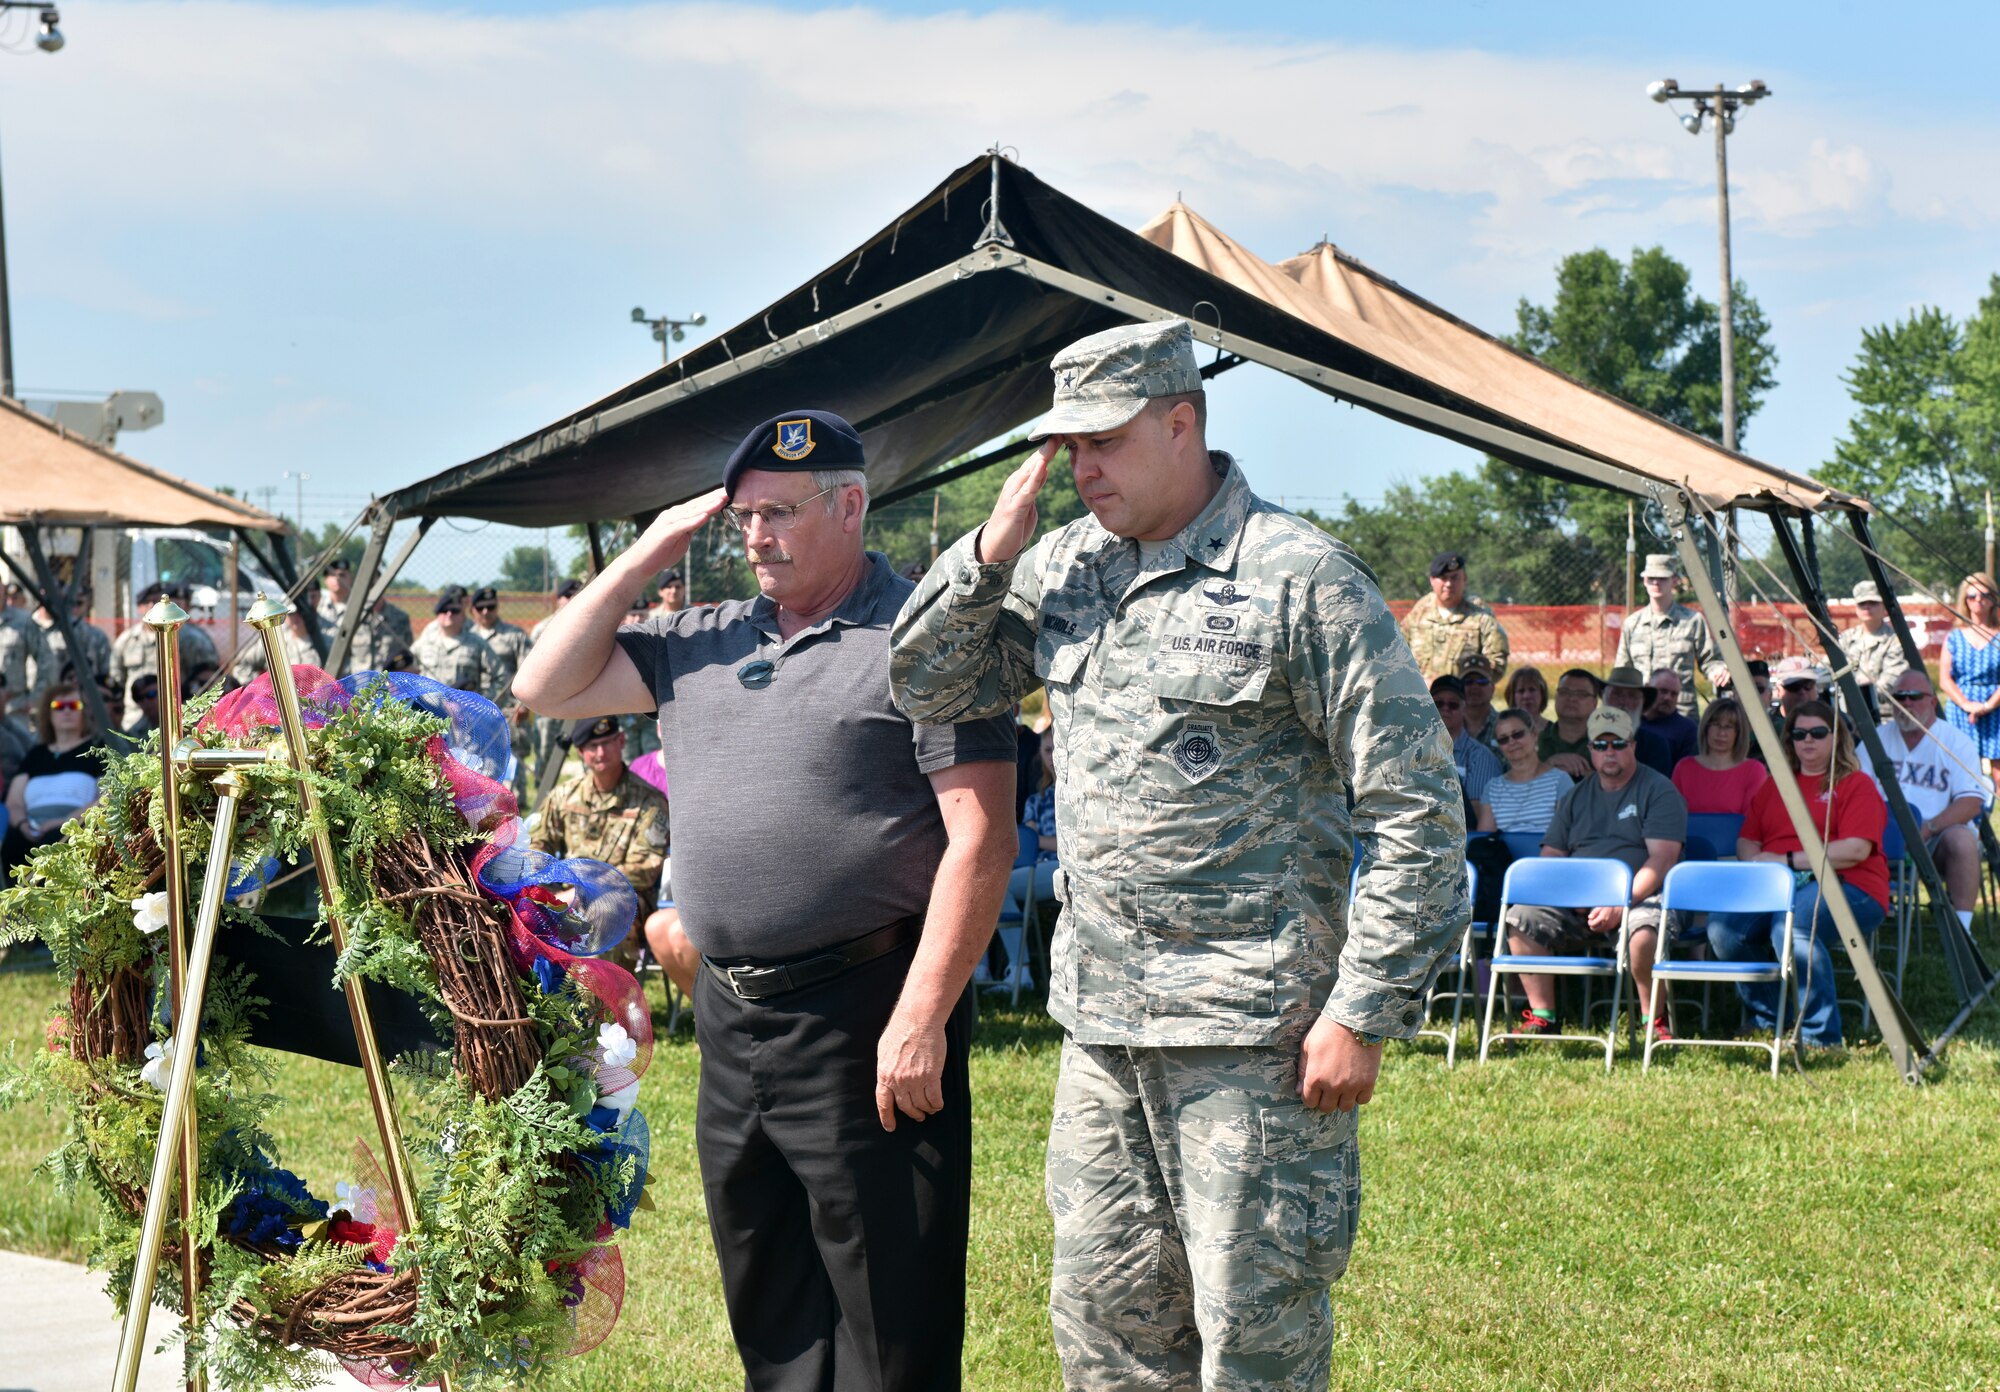 U.S. Air Force Brig. Gen. John Nichols, commander of the 509th Bomb Wing, and Roger Duvall, an Air Force veteran, salute a memorial wreath laid to honor the fallen Airmen of the Charlie Fire Team at Whiteman Air Force Base, Missouri, June 10, 2018